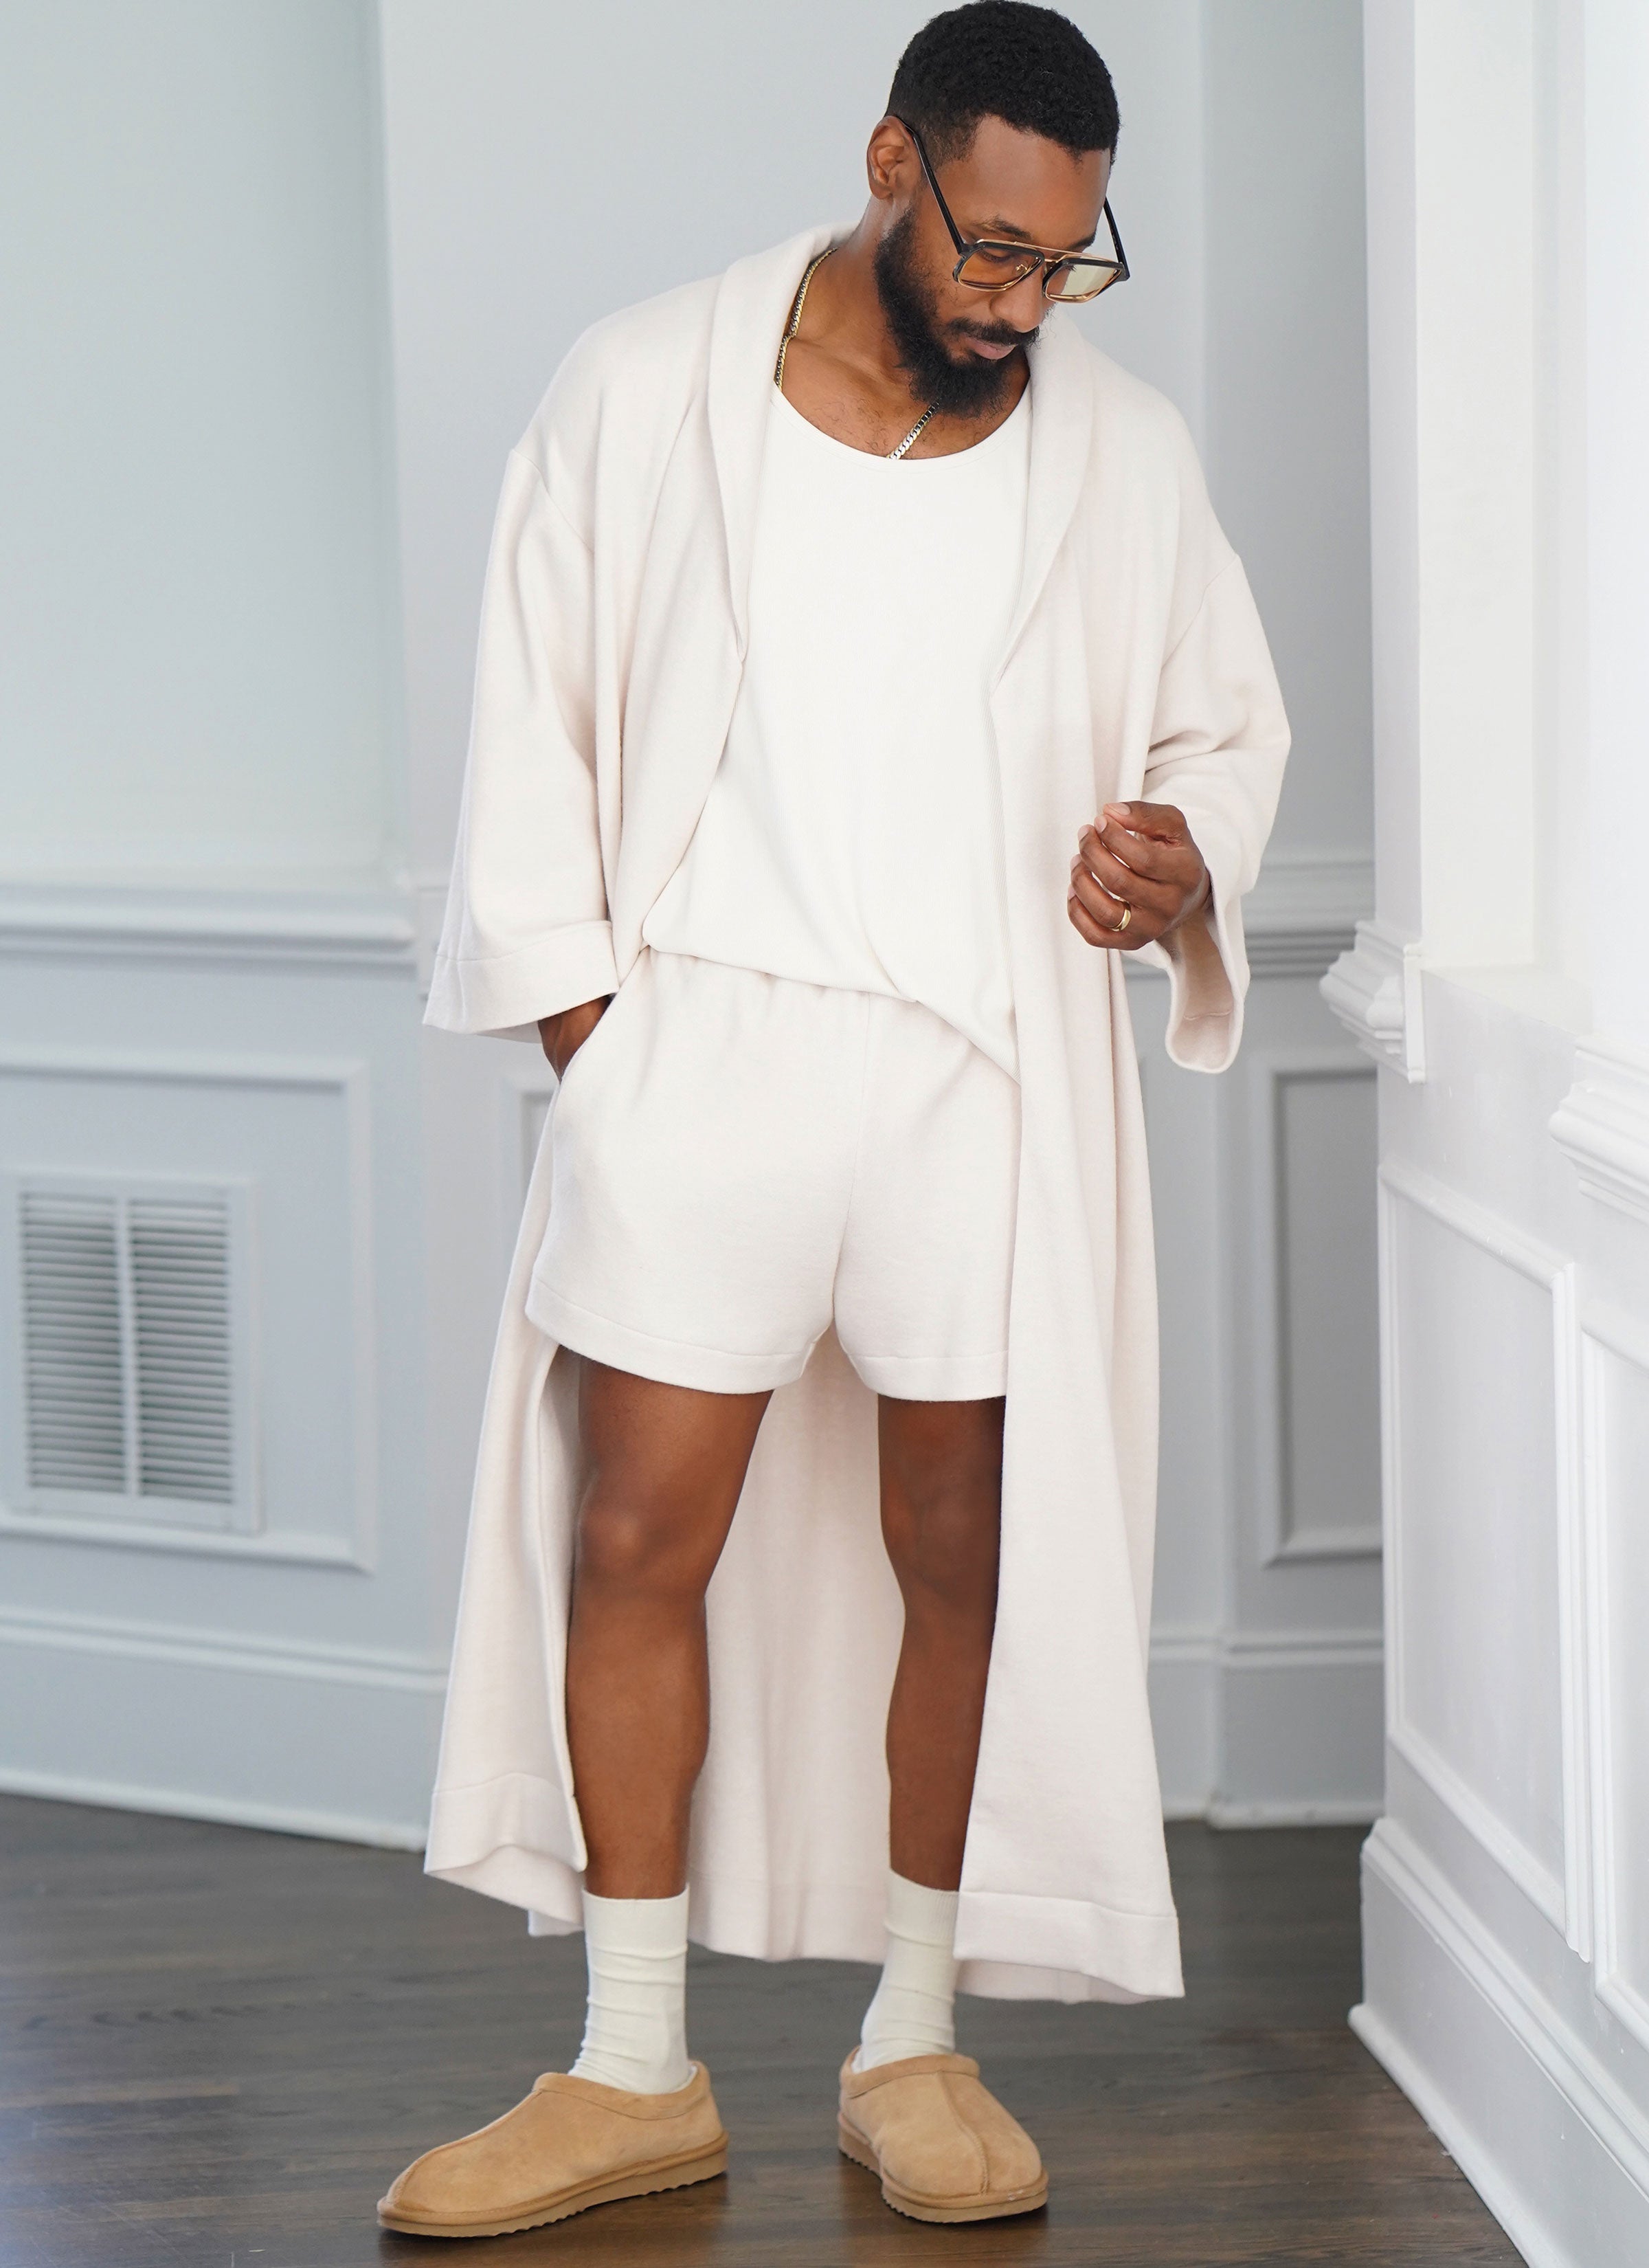 Simplicity Sewing Pattern 9931 Men's Loungewear and robe by Norris Danta Ford from Jaycotts Sewing Supplies